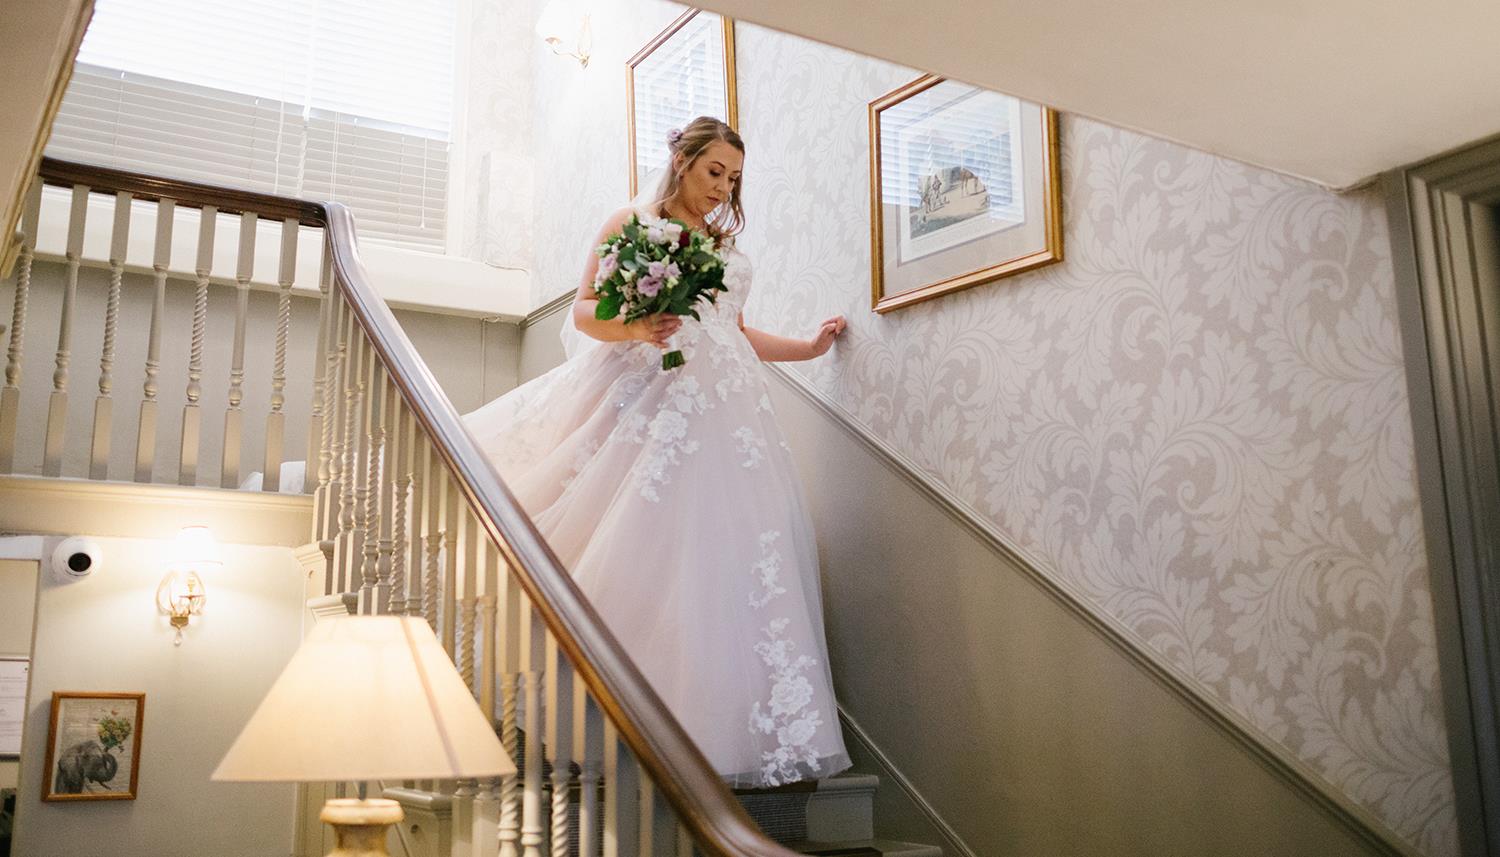 Descending the stairs. Photo Credit: Ilaria Petrucci Photography